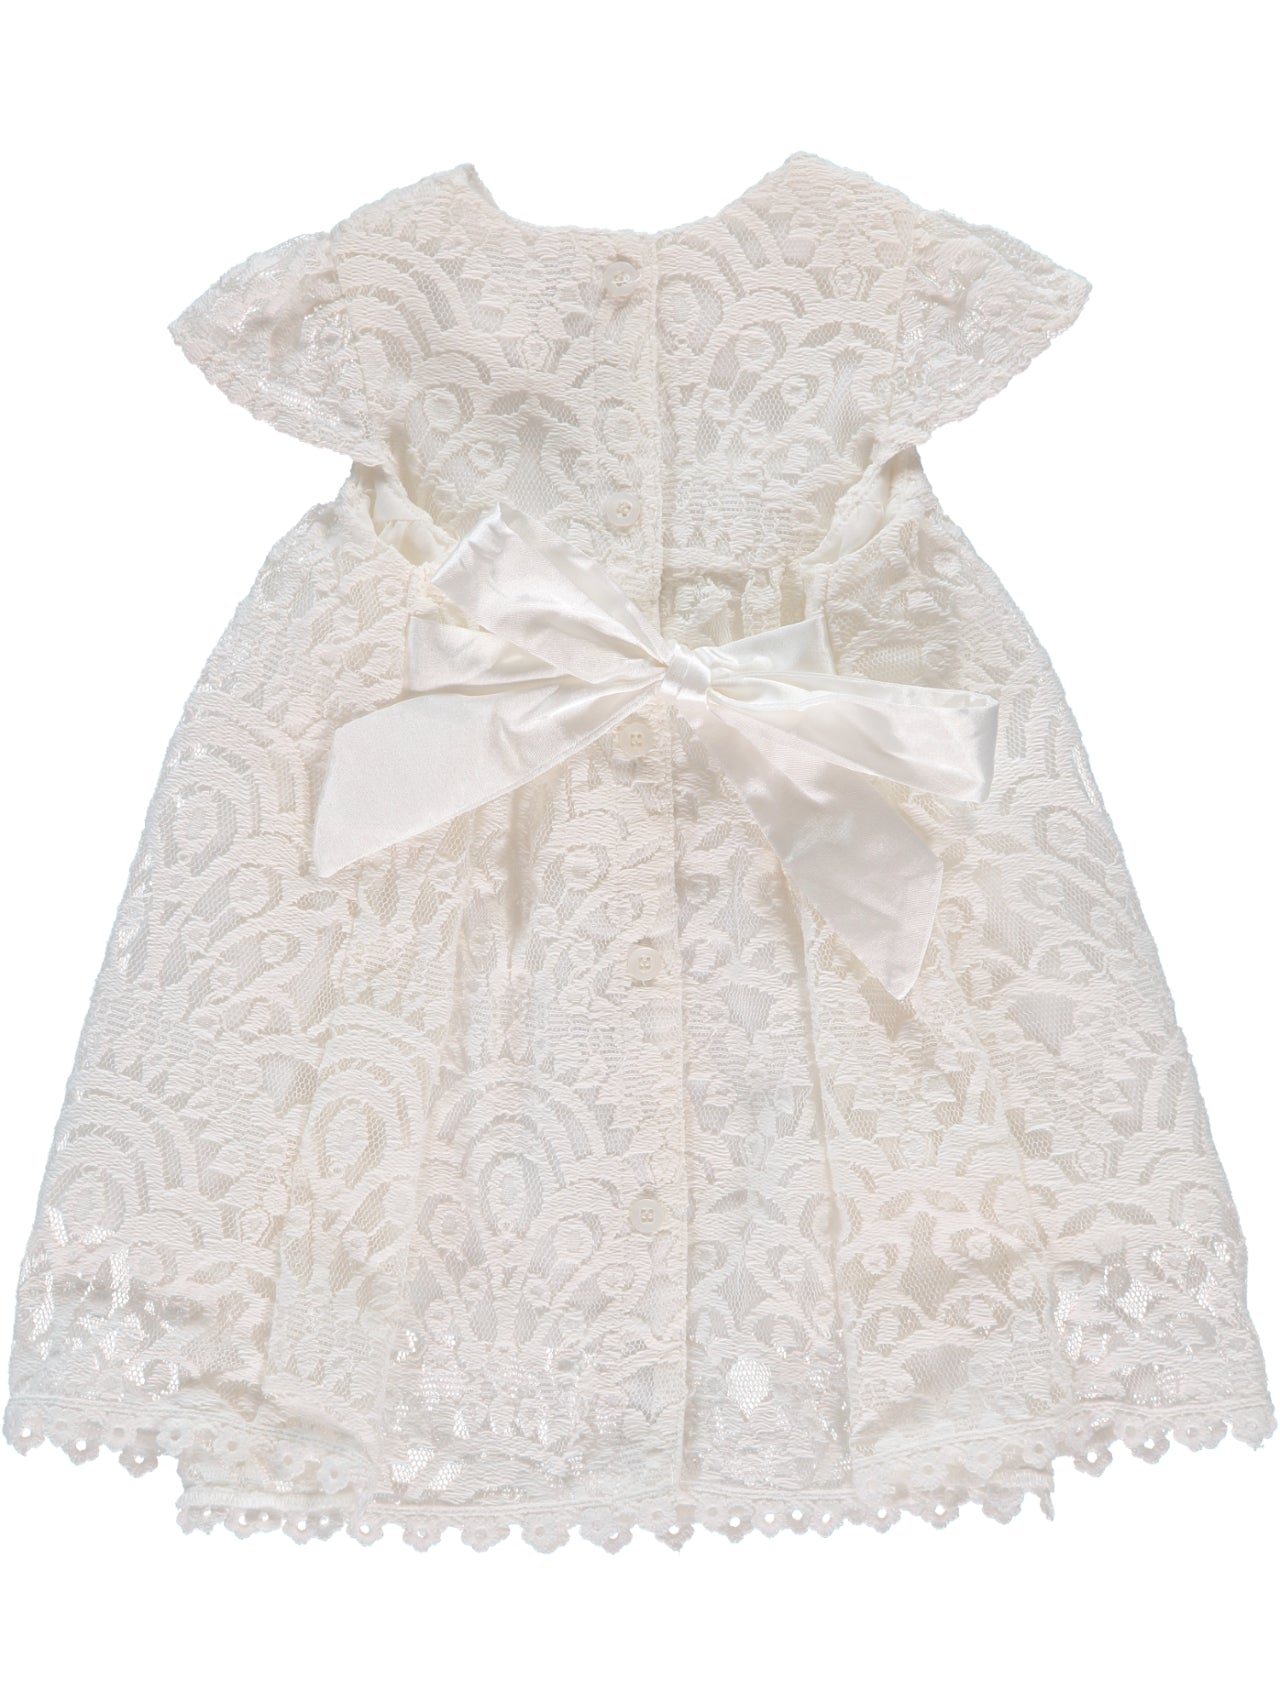 Wholesale Baby Girl Christening Lace Dress with Matching Bonnet 5 - Imagewear